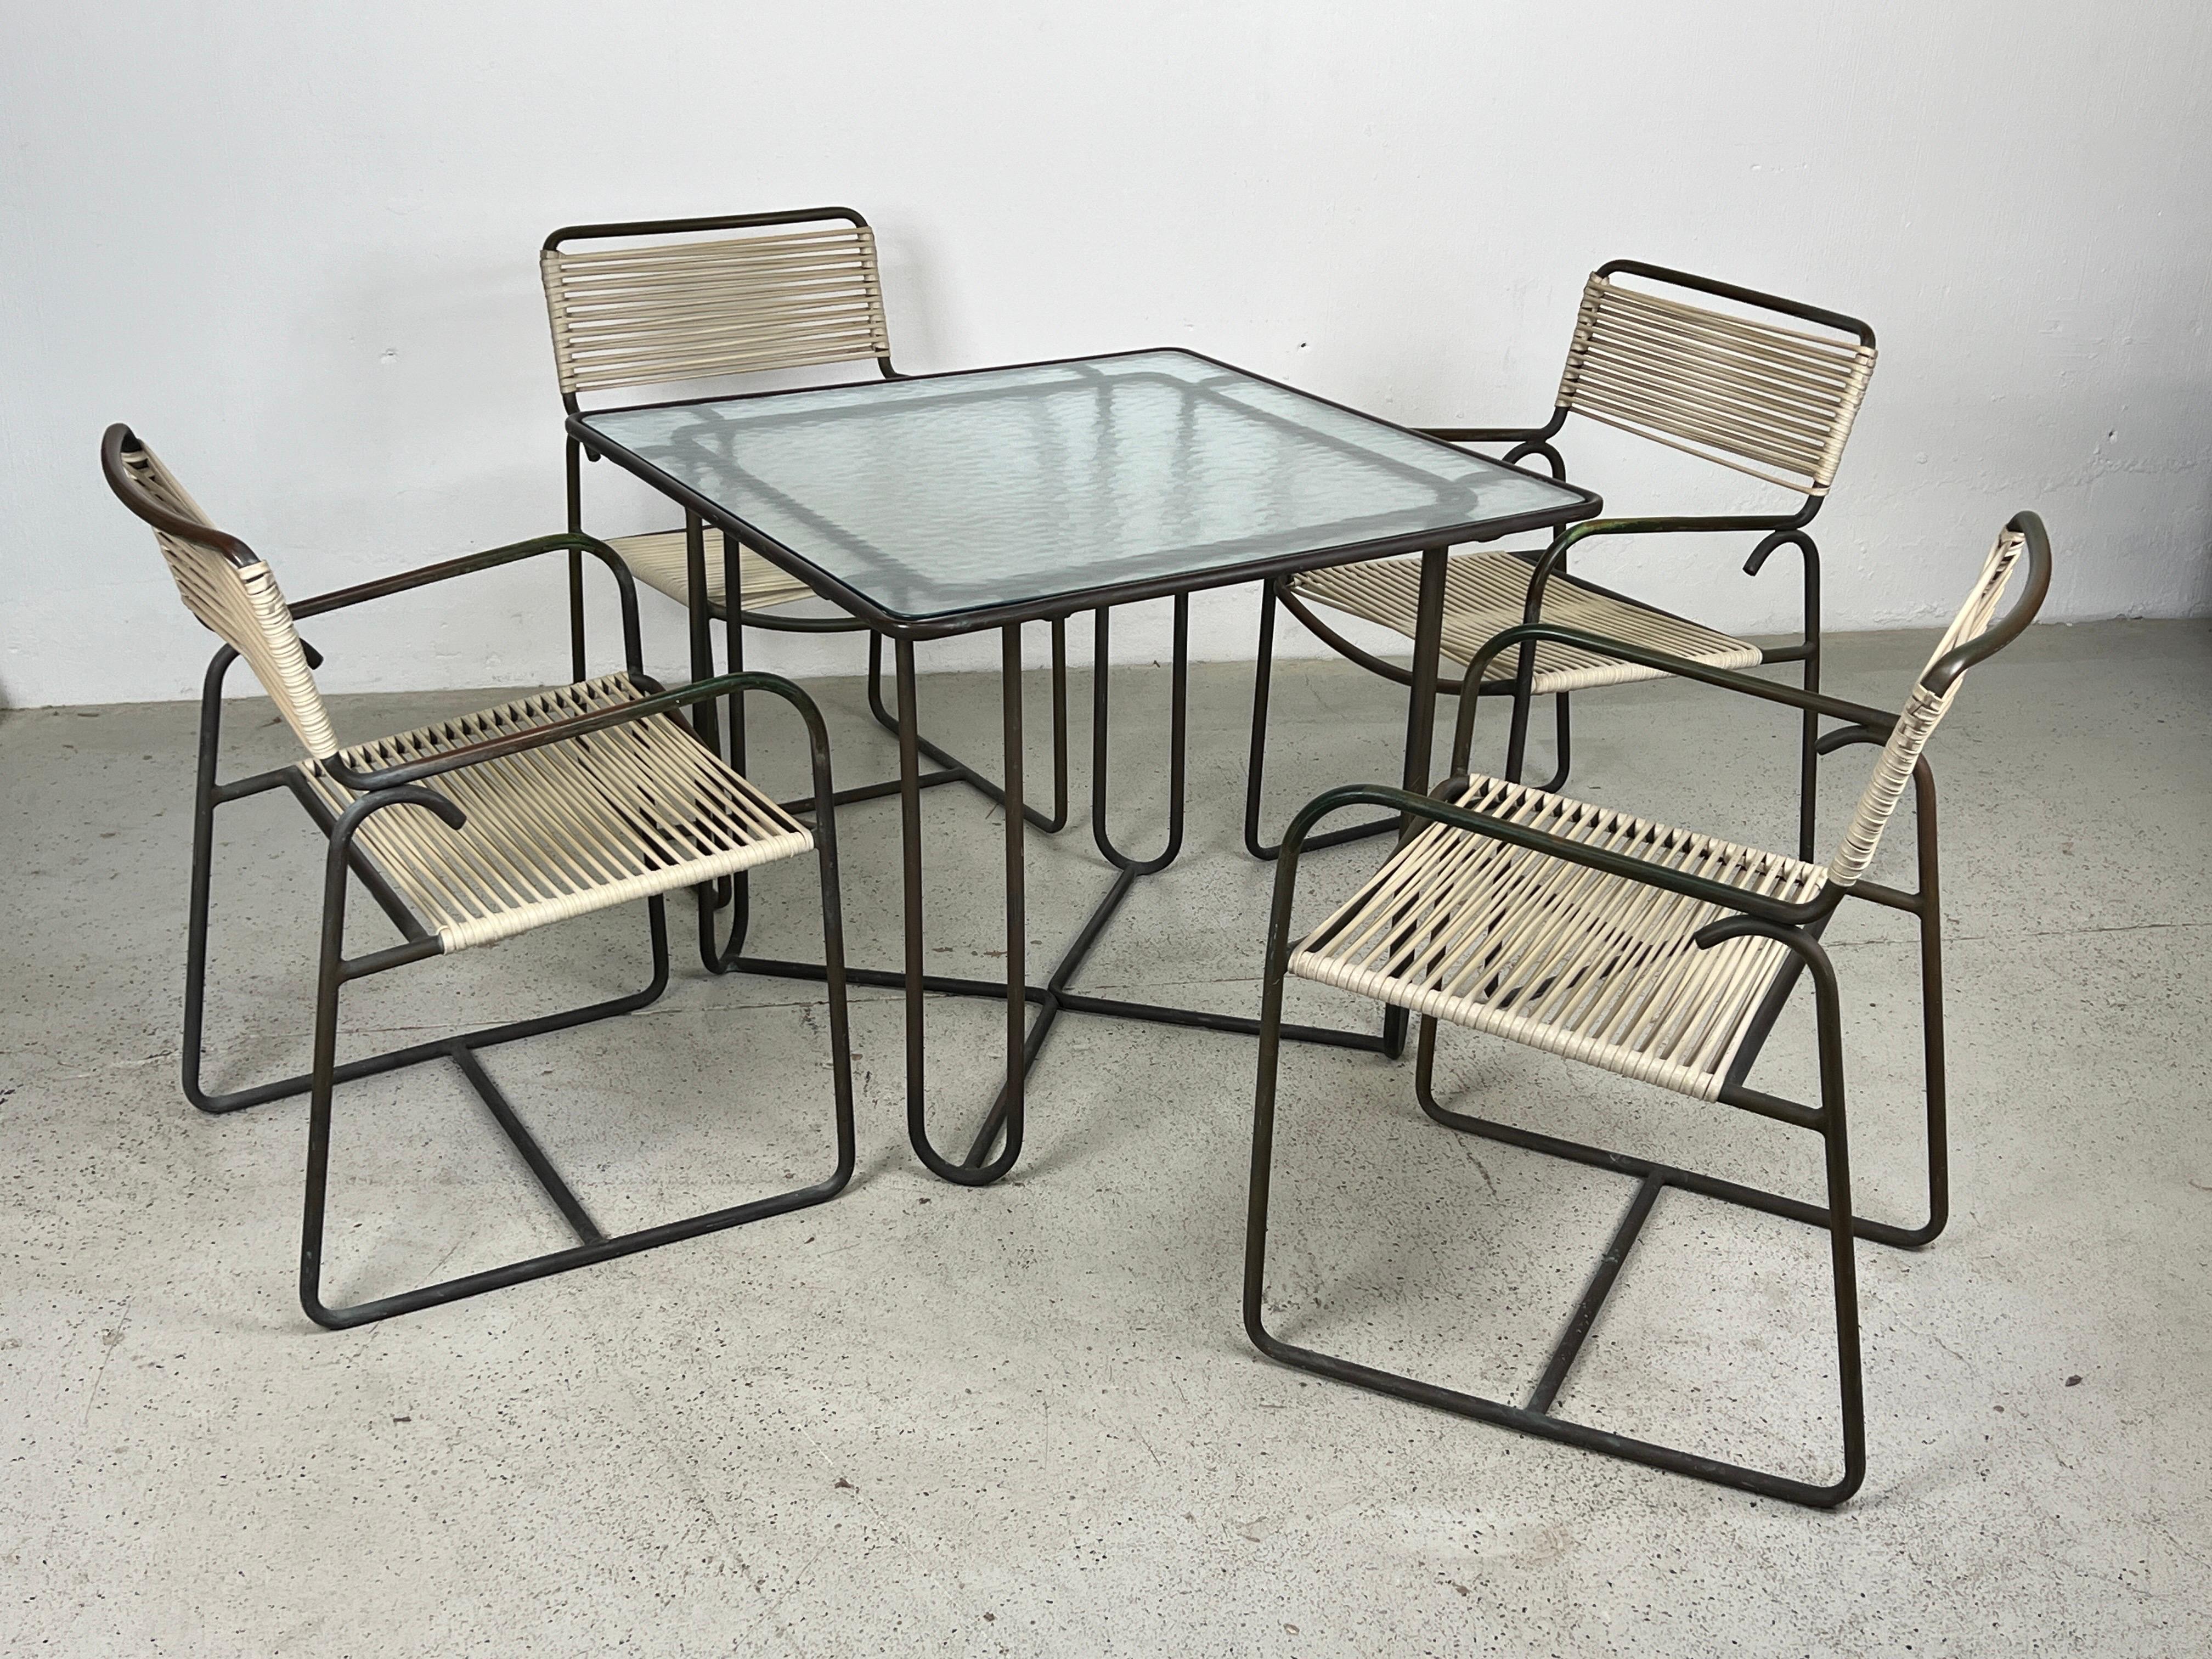 A beautifully patinated bronze patio set by Walter Lamb. The set consists of two dining tables and four arm chairs that can be used together or separate. The set is all original and in wonderful condition. The original vinyl cording is in tact and